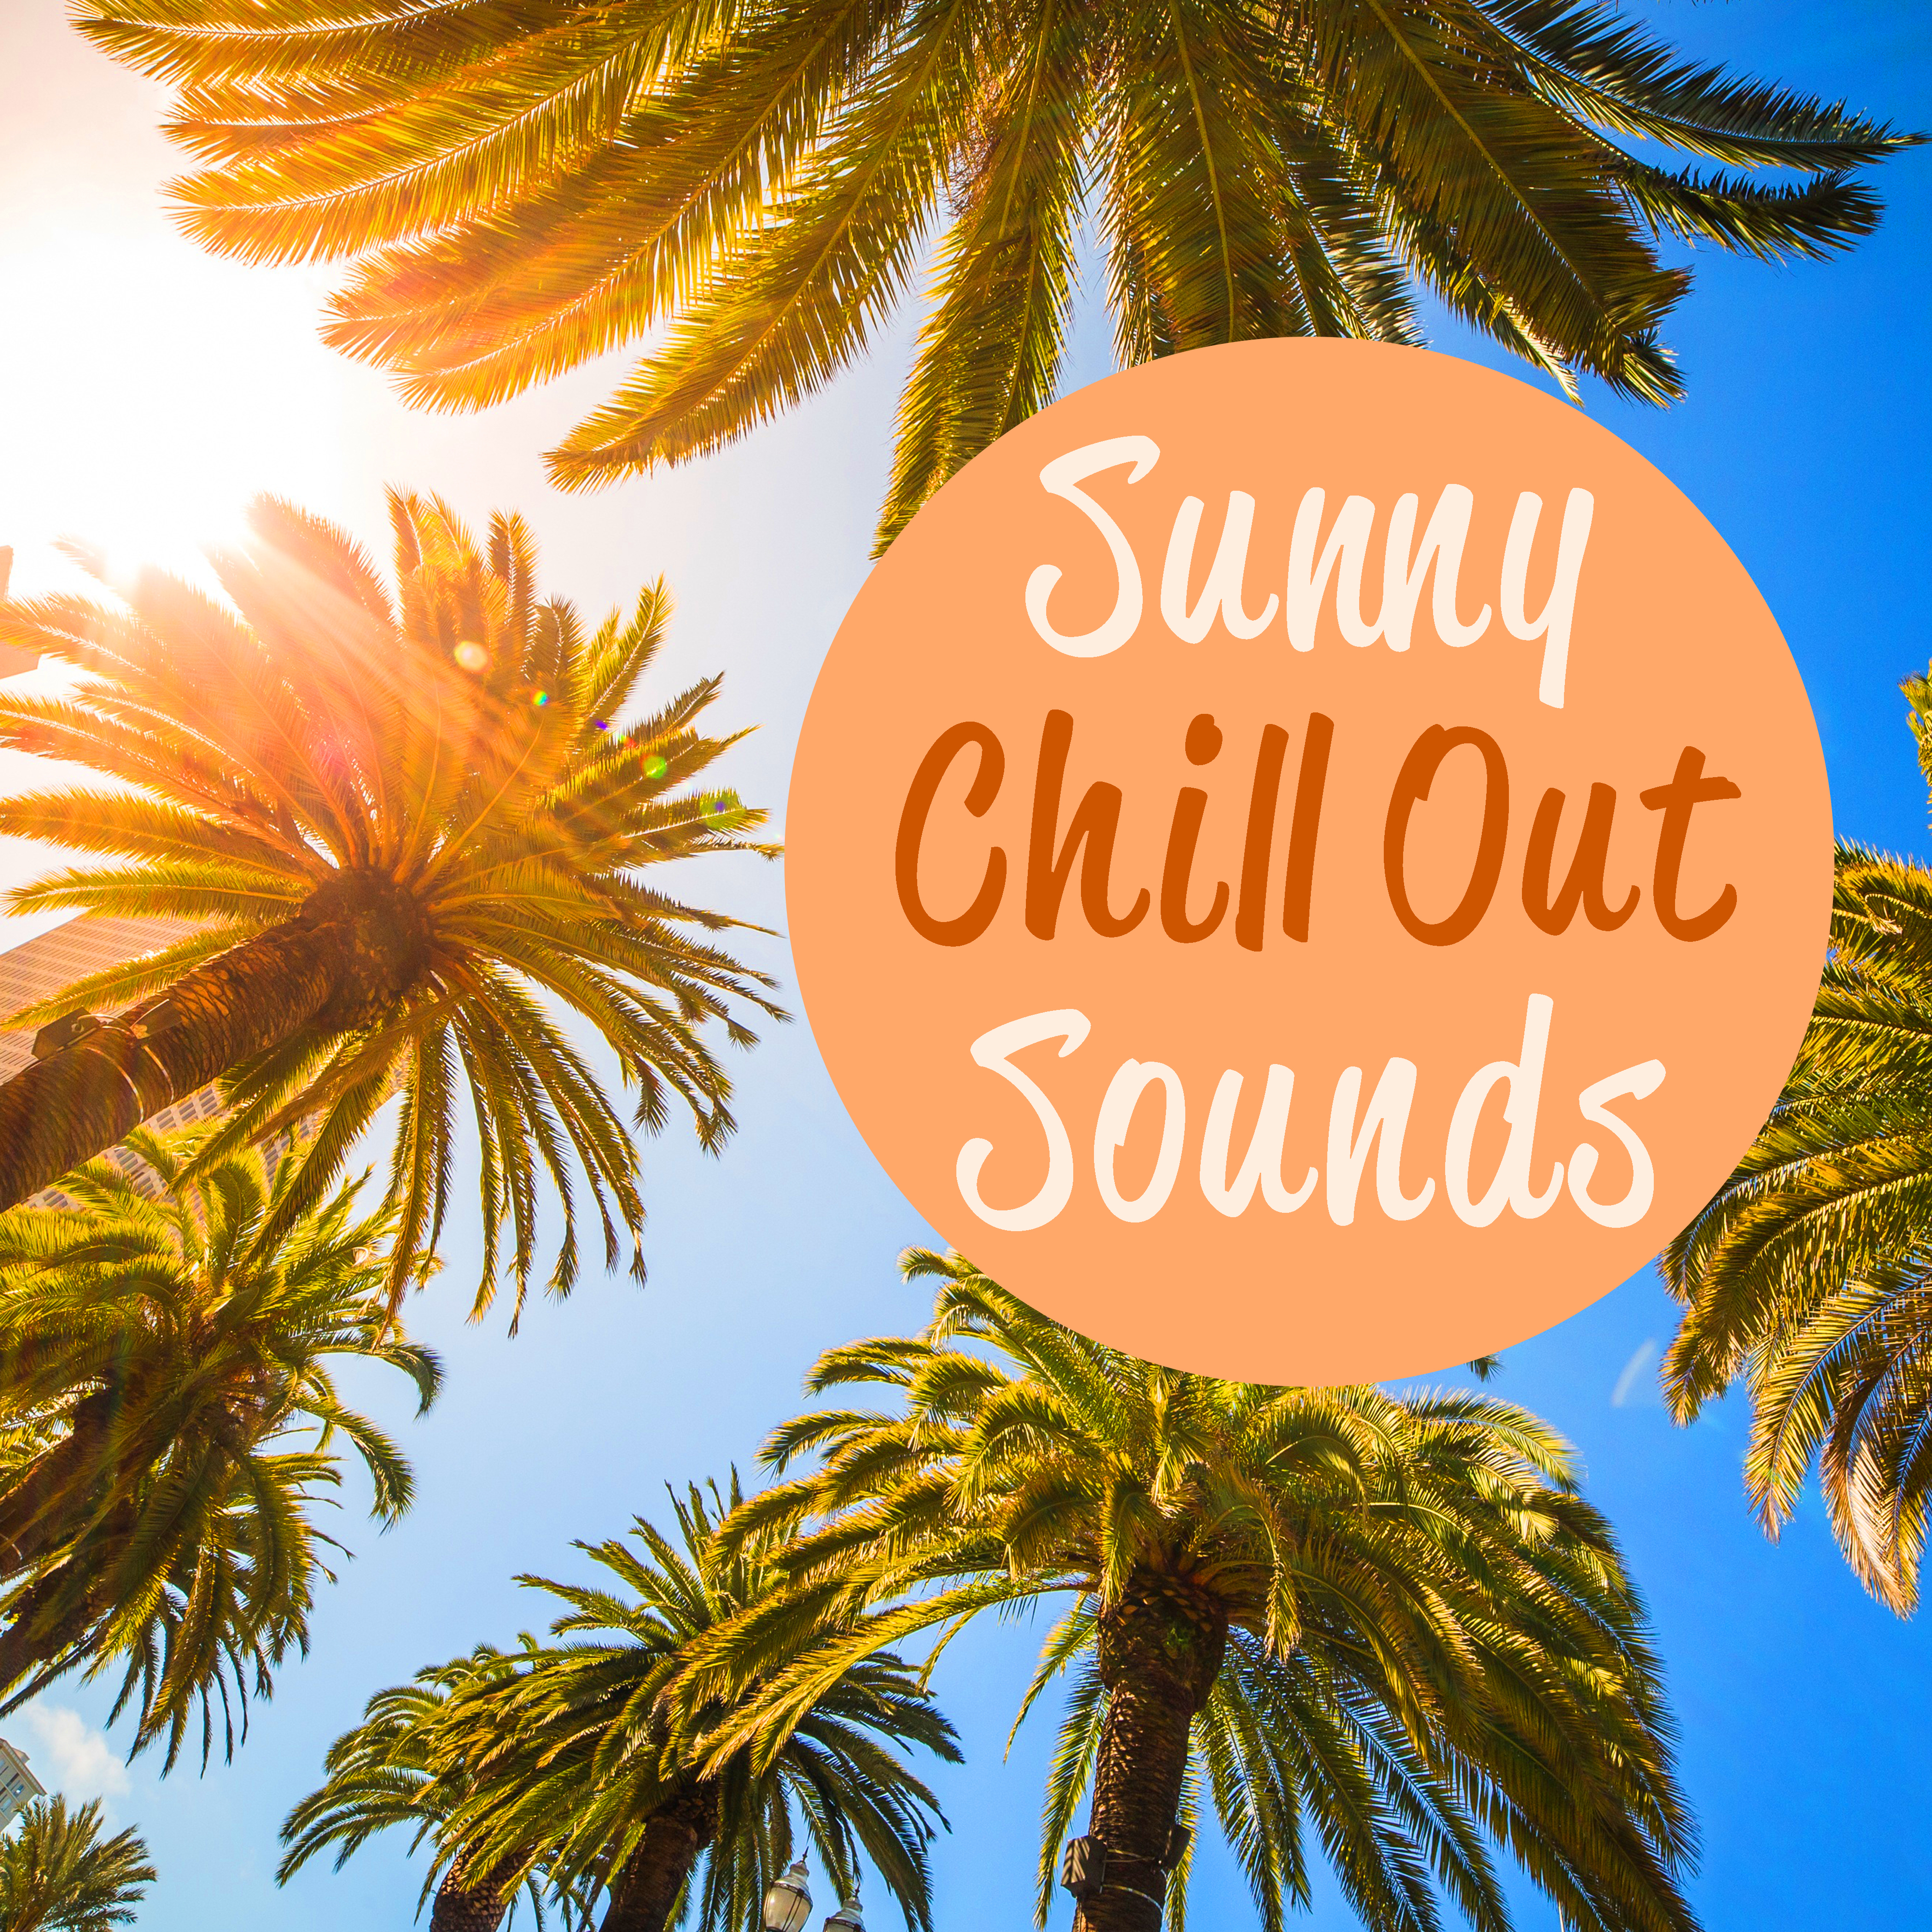 Sunny Chill Out Sounds  Calming Waves, Summer Rest, Sunny Chill Out, Relaxing Melodies